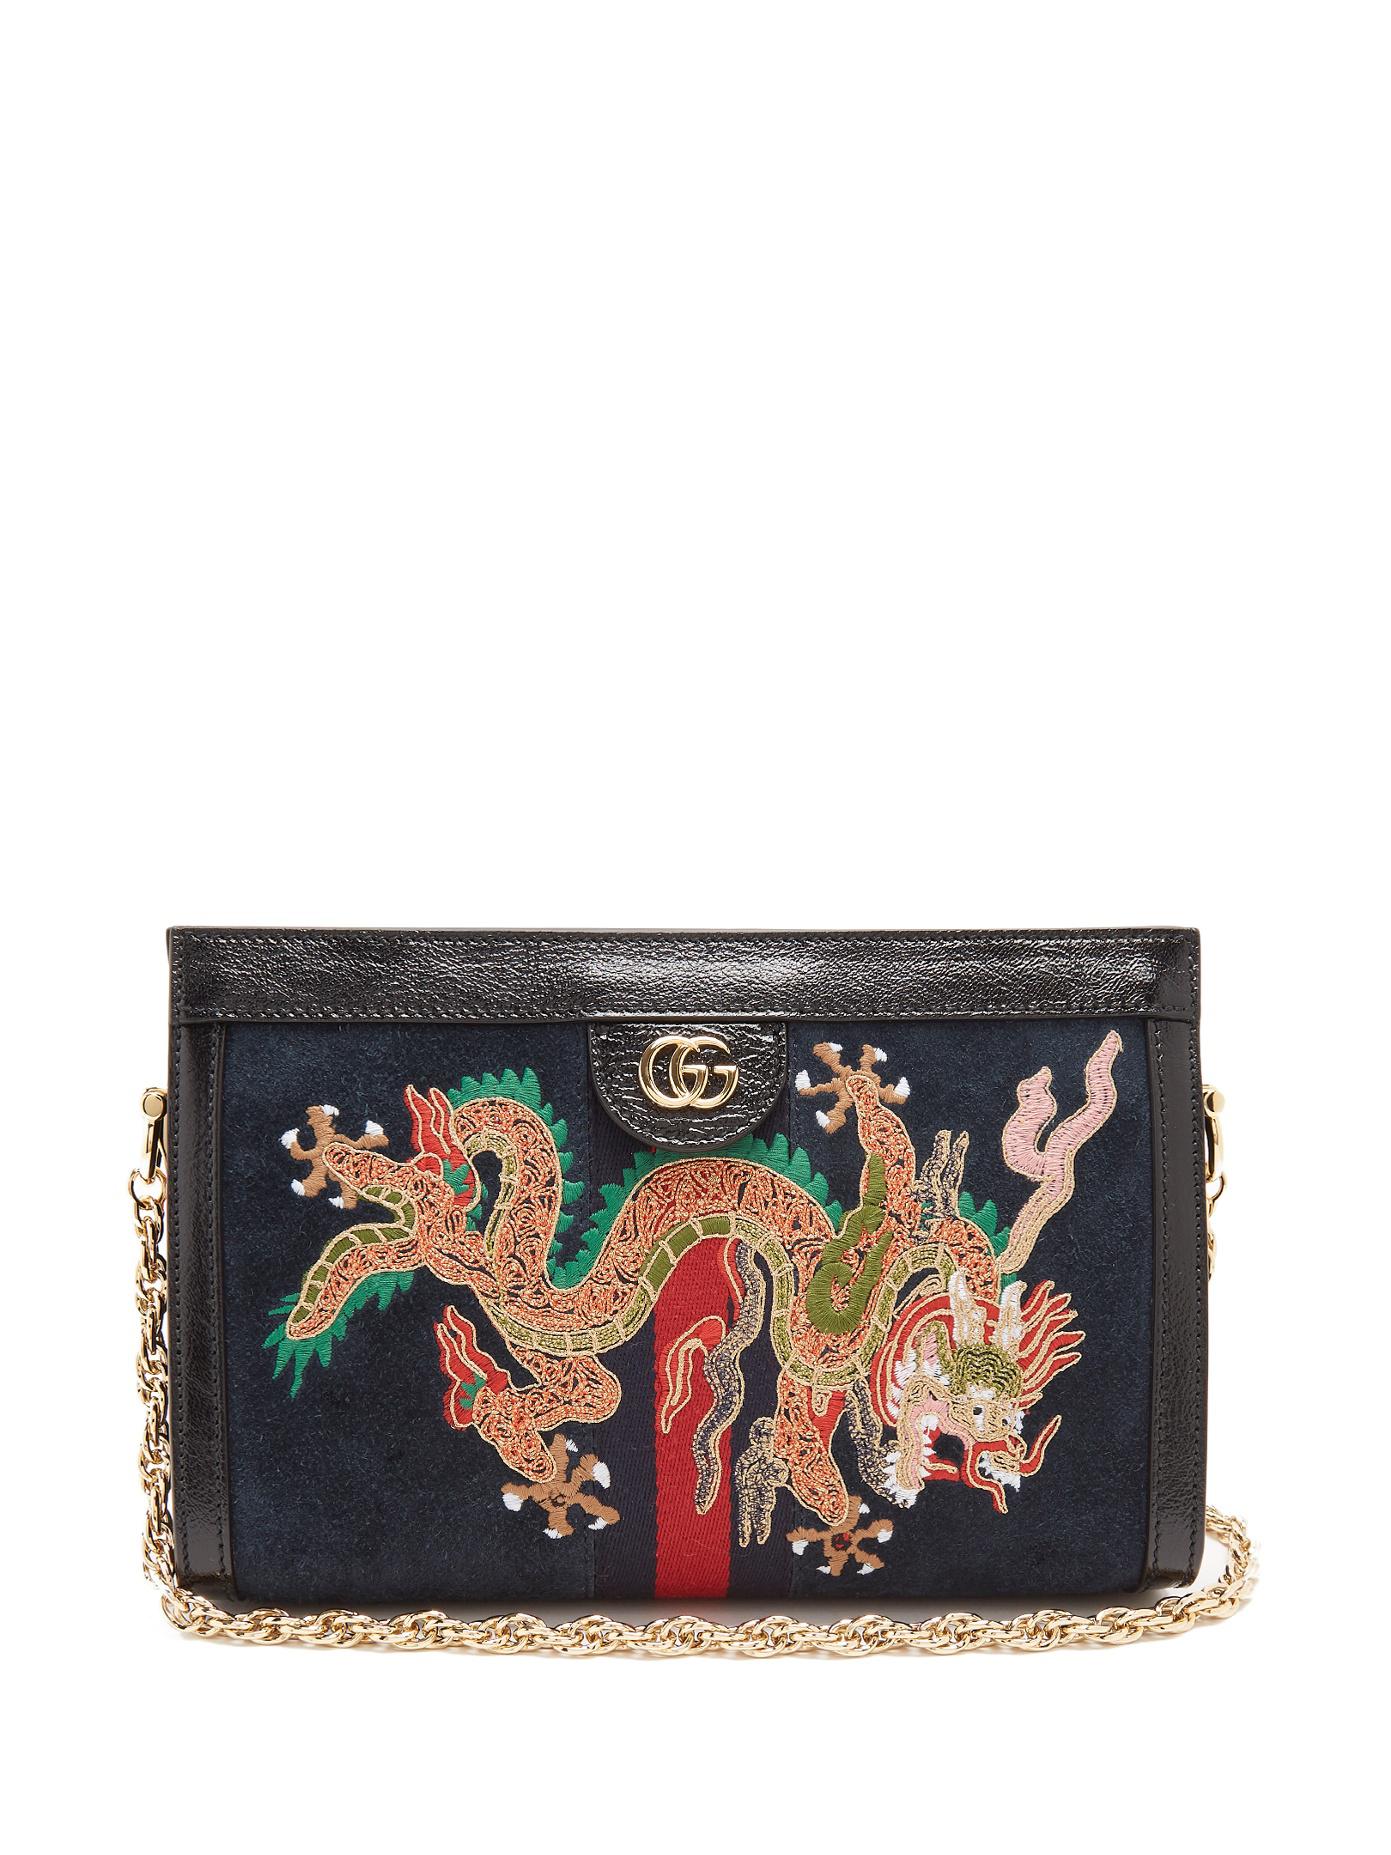 Gucci Ophidia Dragon-embroidered Suede Shoulder Bag in Black | Lyst